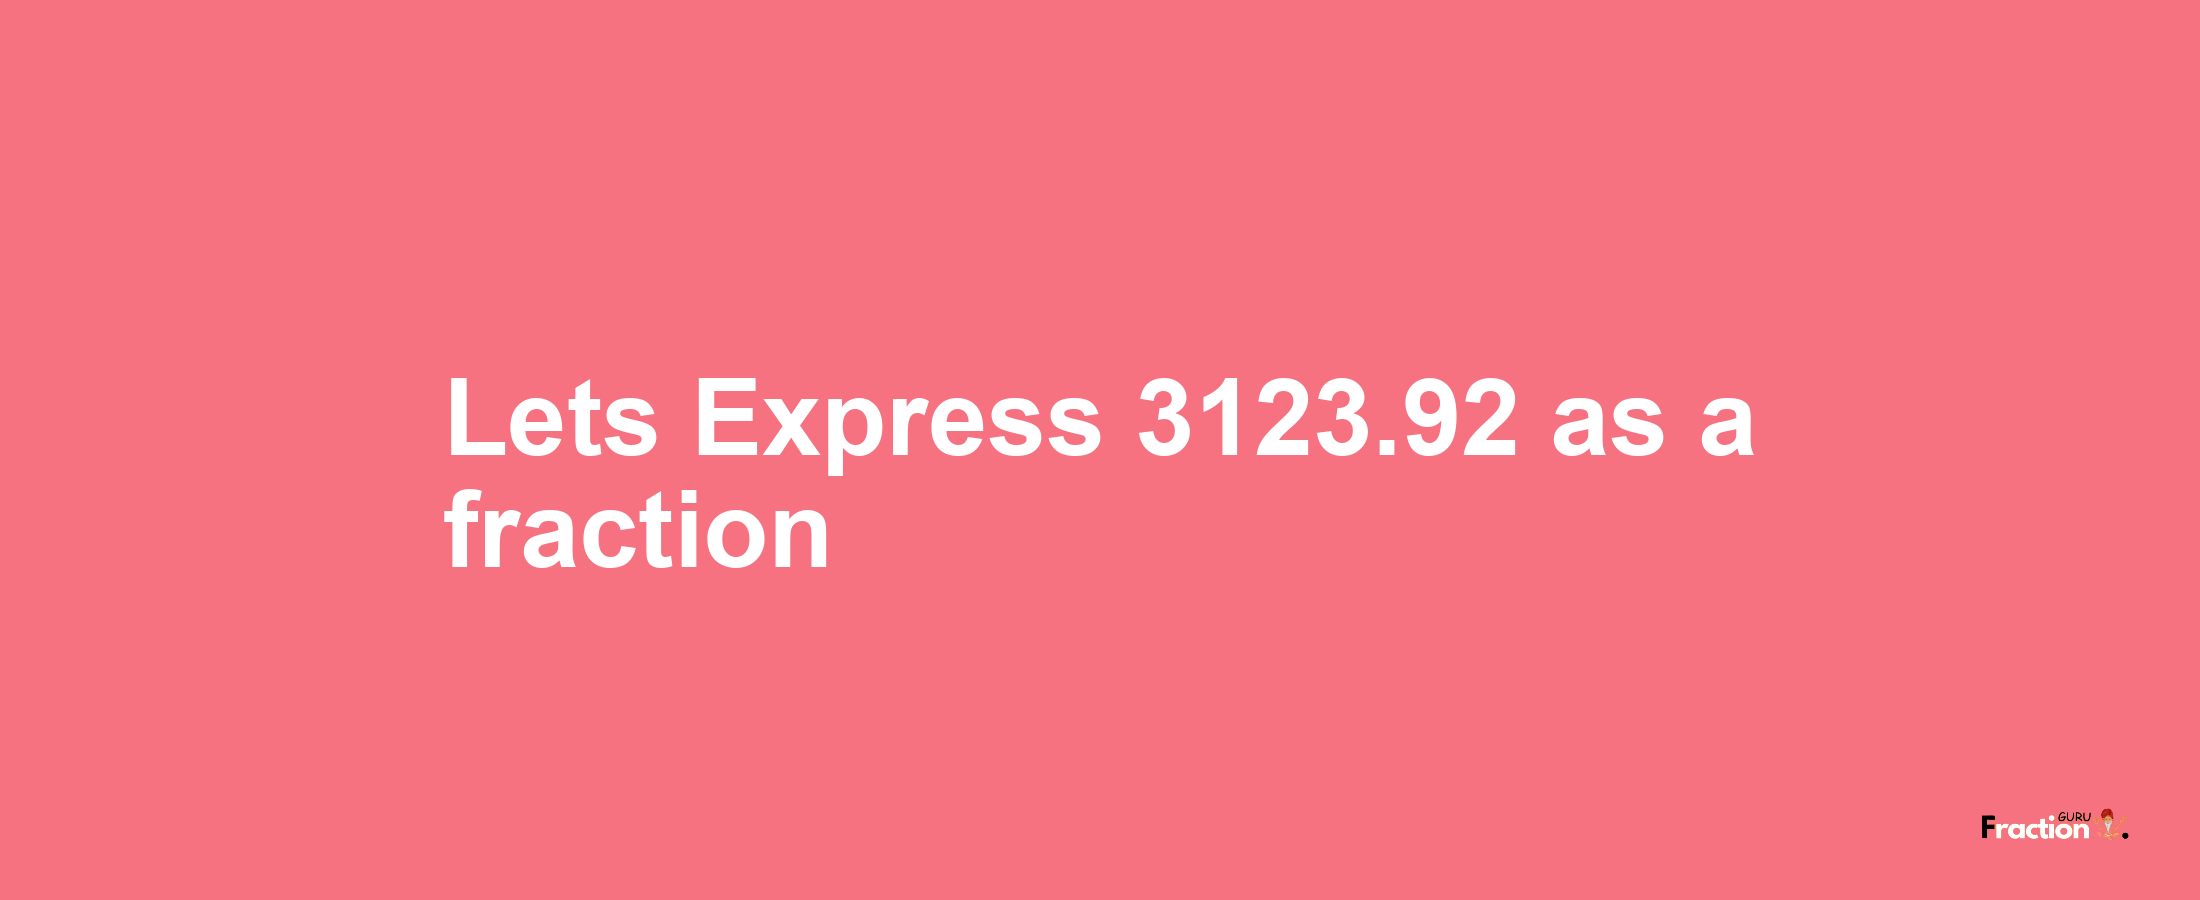 Lets Express 3123.92 as afraction